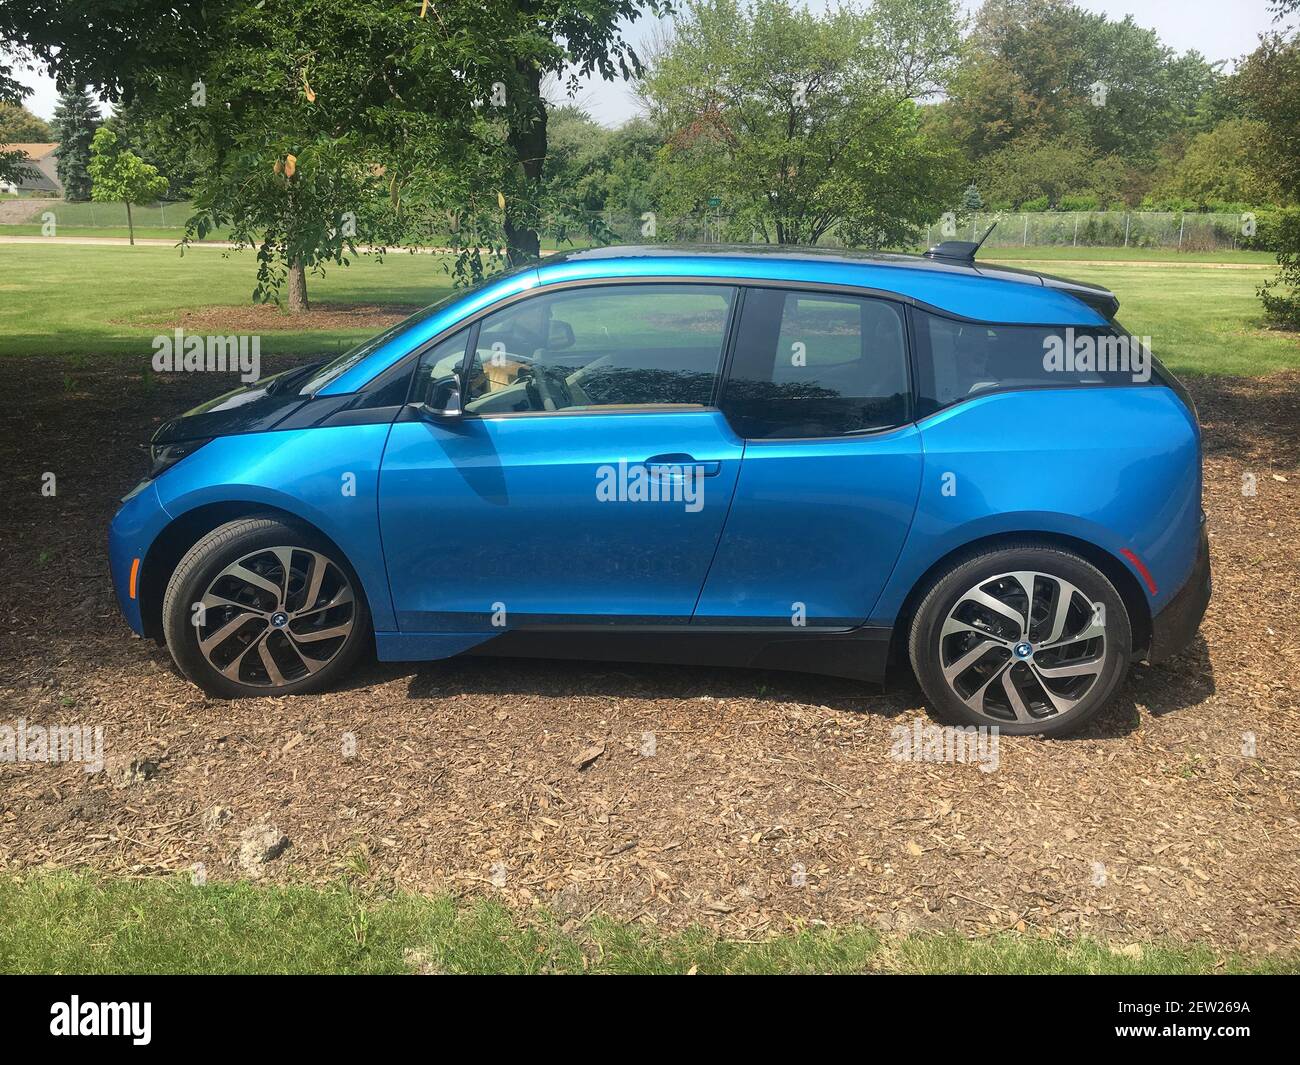 The BMW i3 REx electric vehicle a 2.4 gallon range extender gets a bigger battery pack and capacity for 2017, increasing range from 72 miles to 97 electric-only miles. The